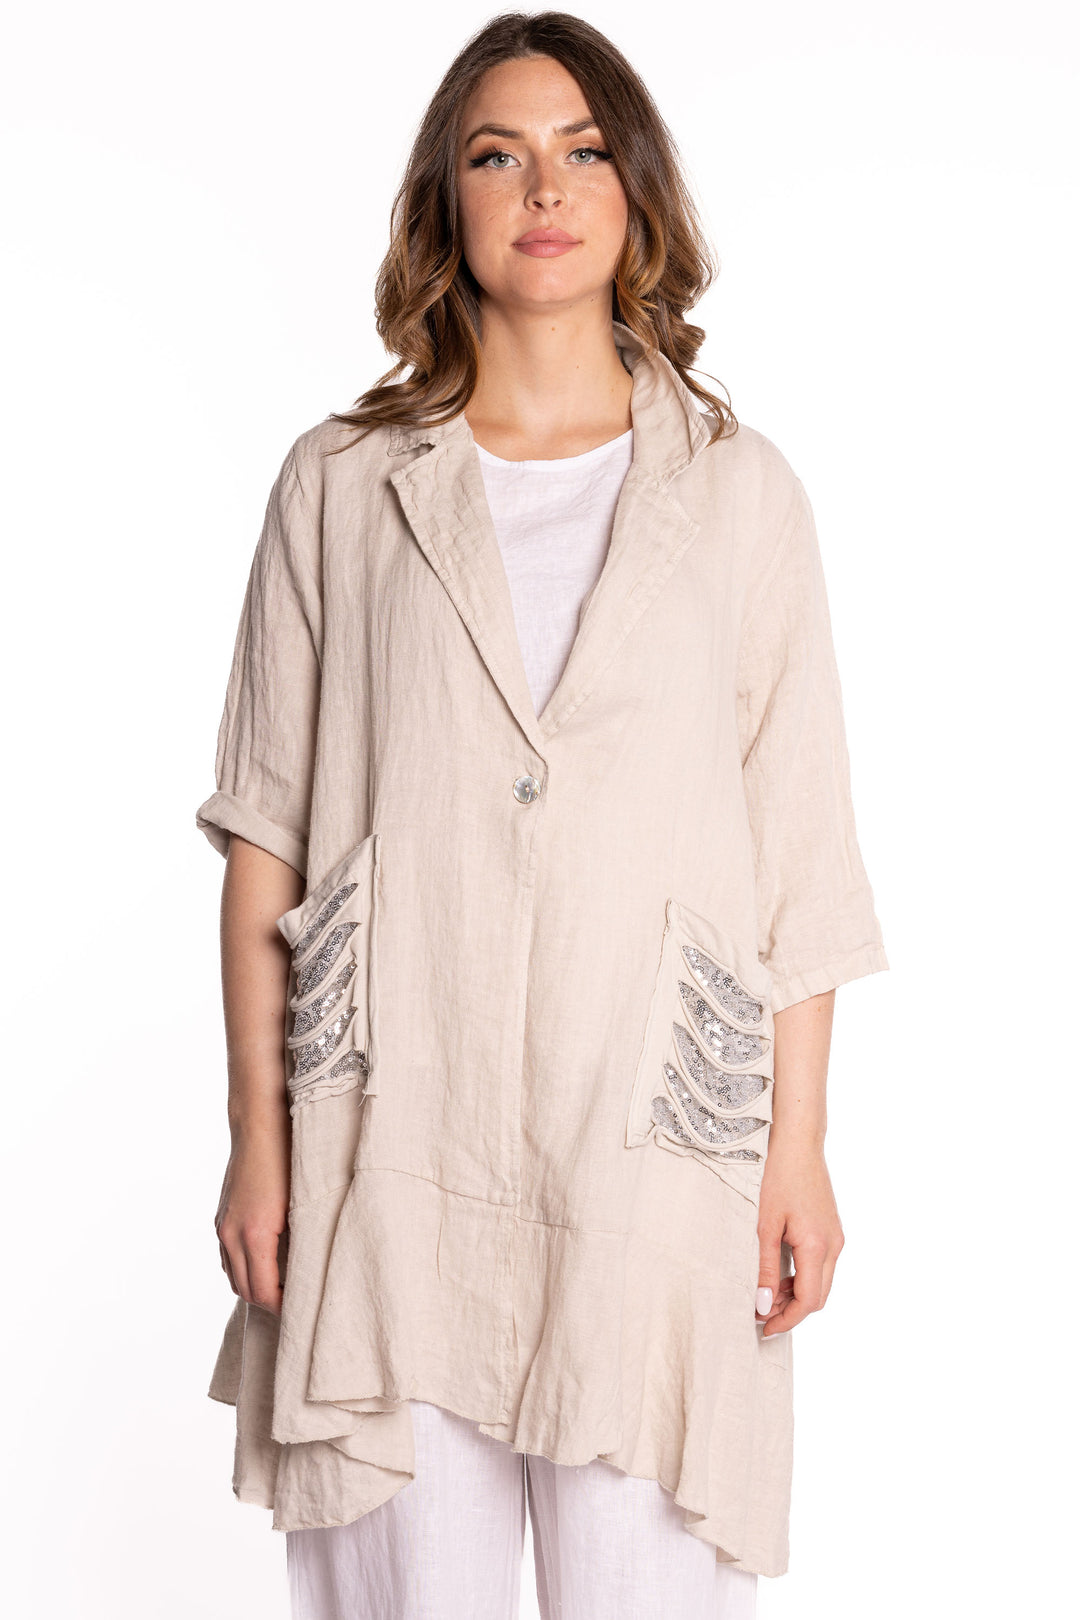 Etern Spring 2023 women's casual loose linen cardigan jacket with sequin pockets